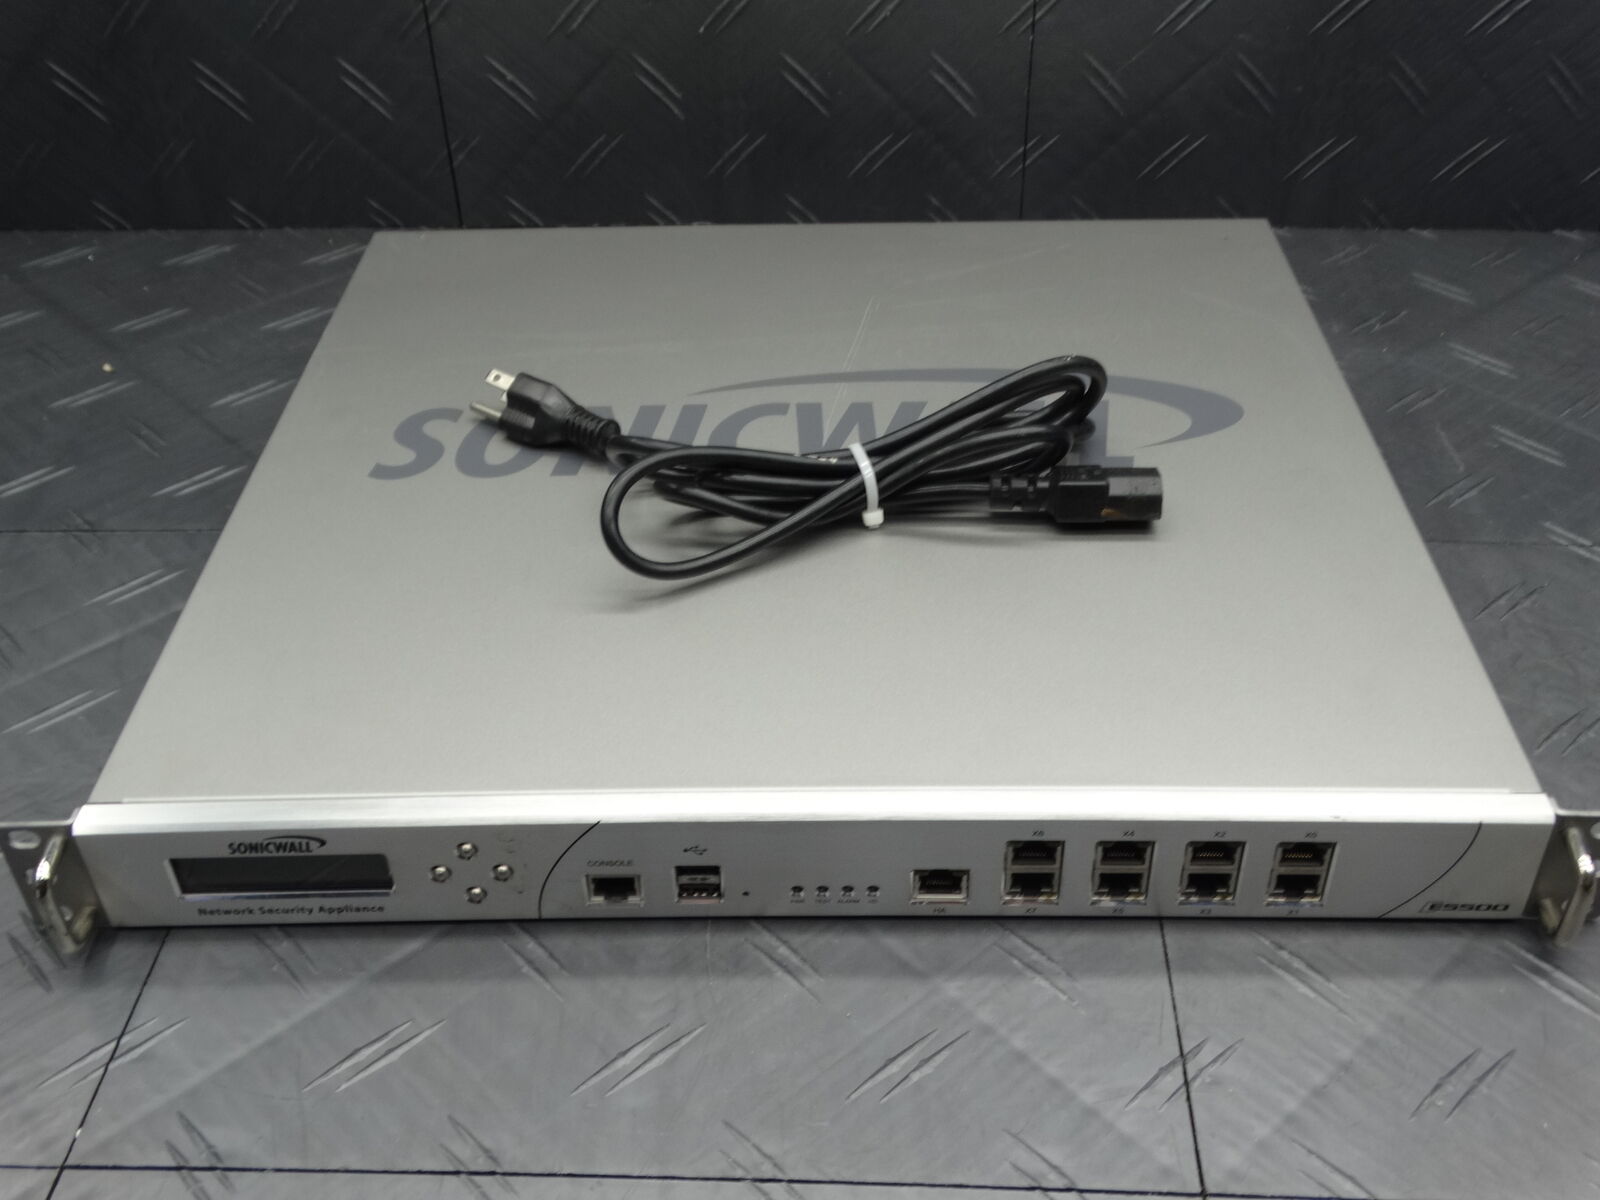 Sonicwall NSA E5500 Model 1RK22-073 Network Security Appliance 101-500228-6